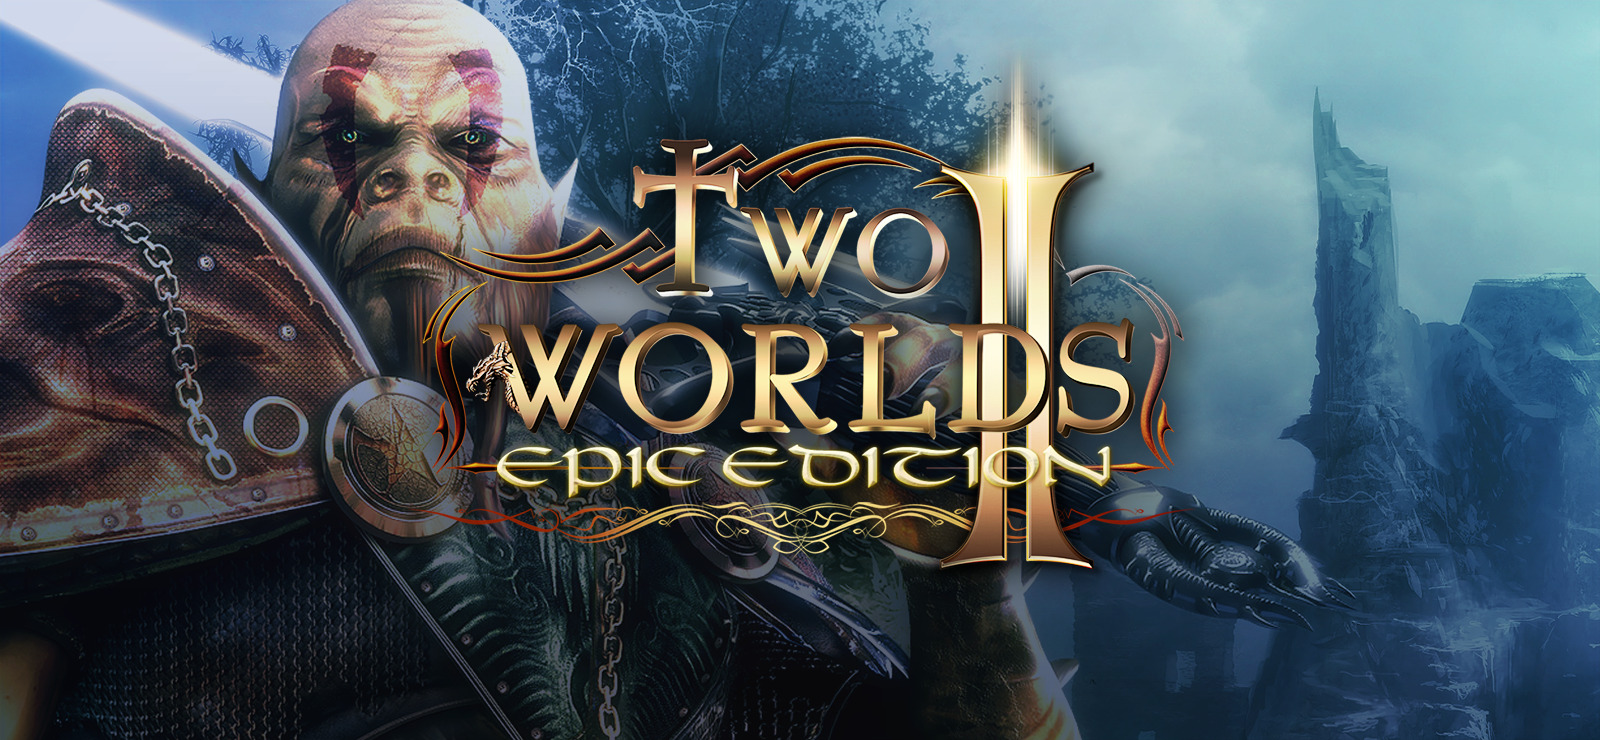 Two Worlds II: Epic Edition on GOG.com